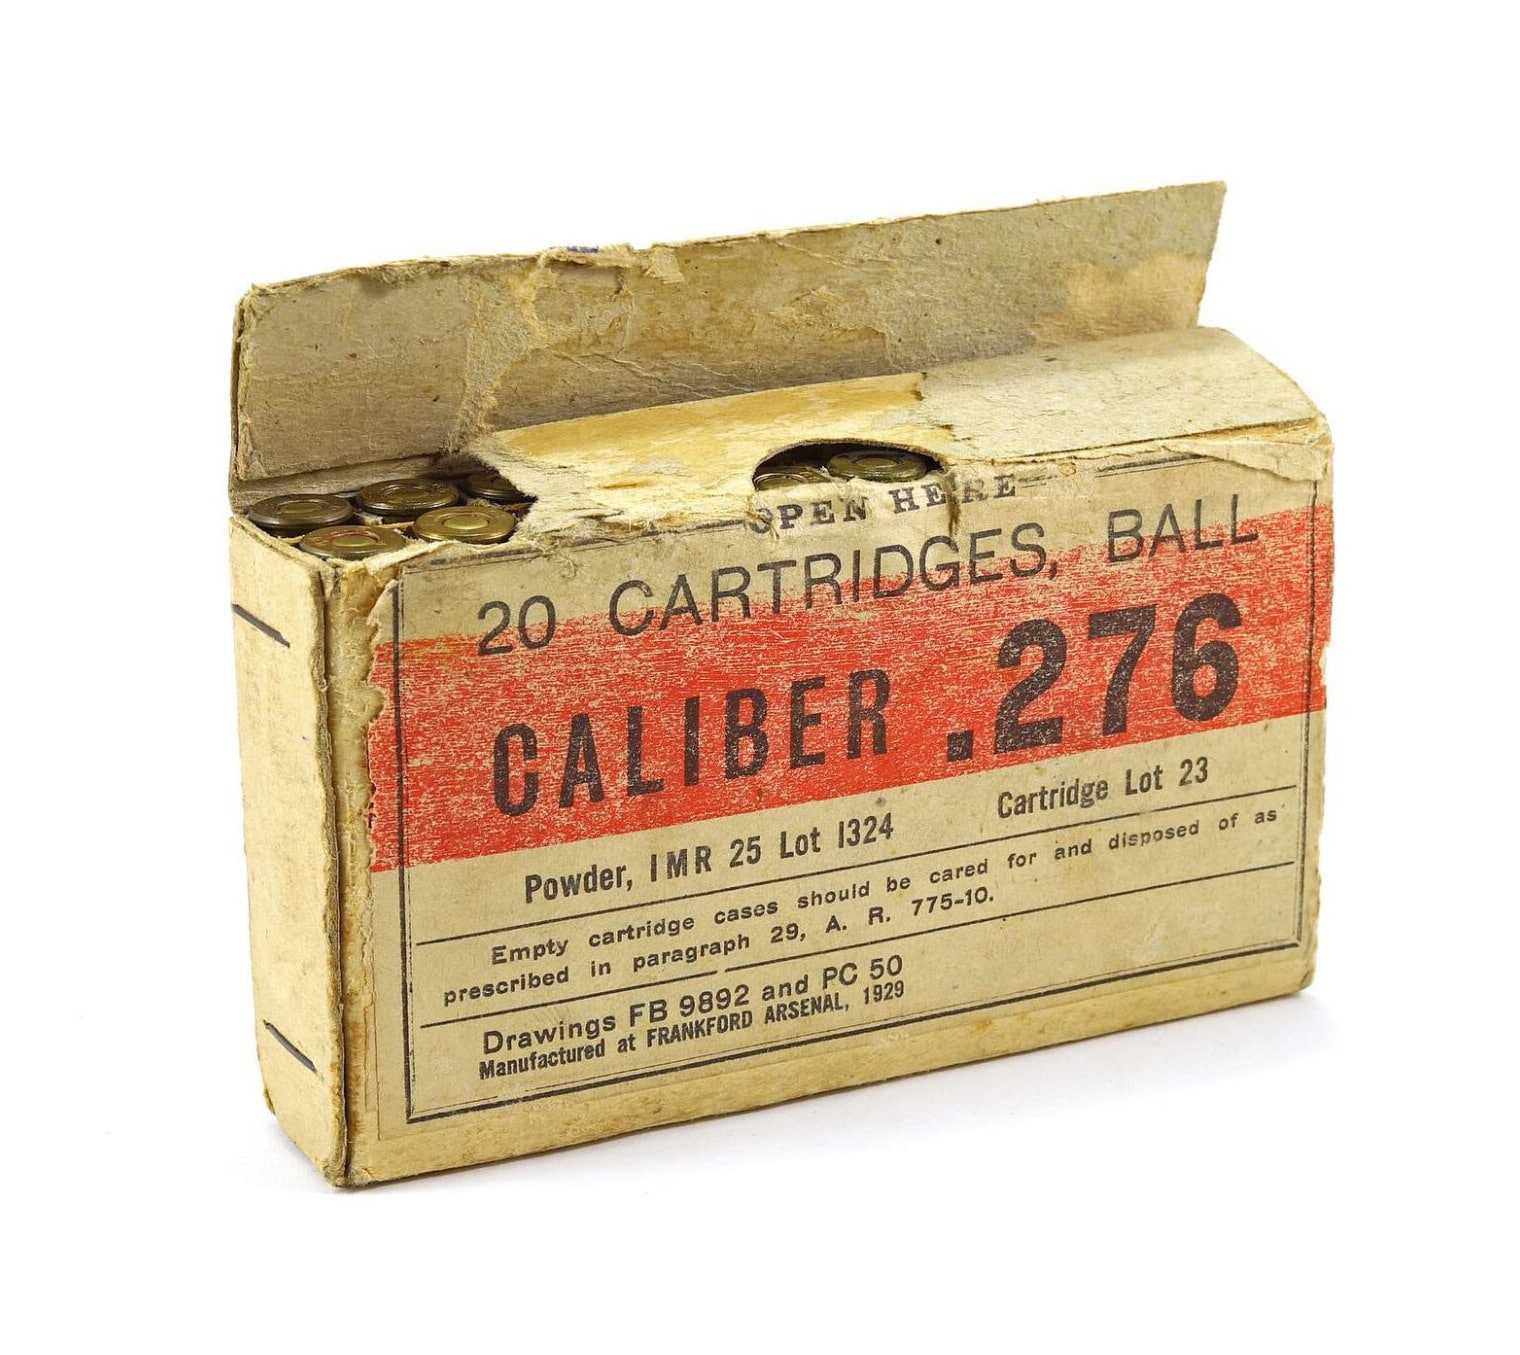 A box of non-lubricated .276 ammunition